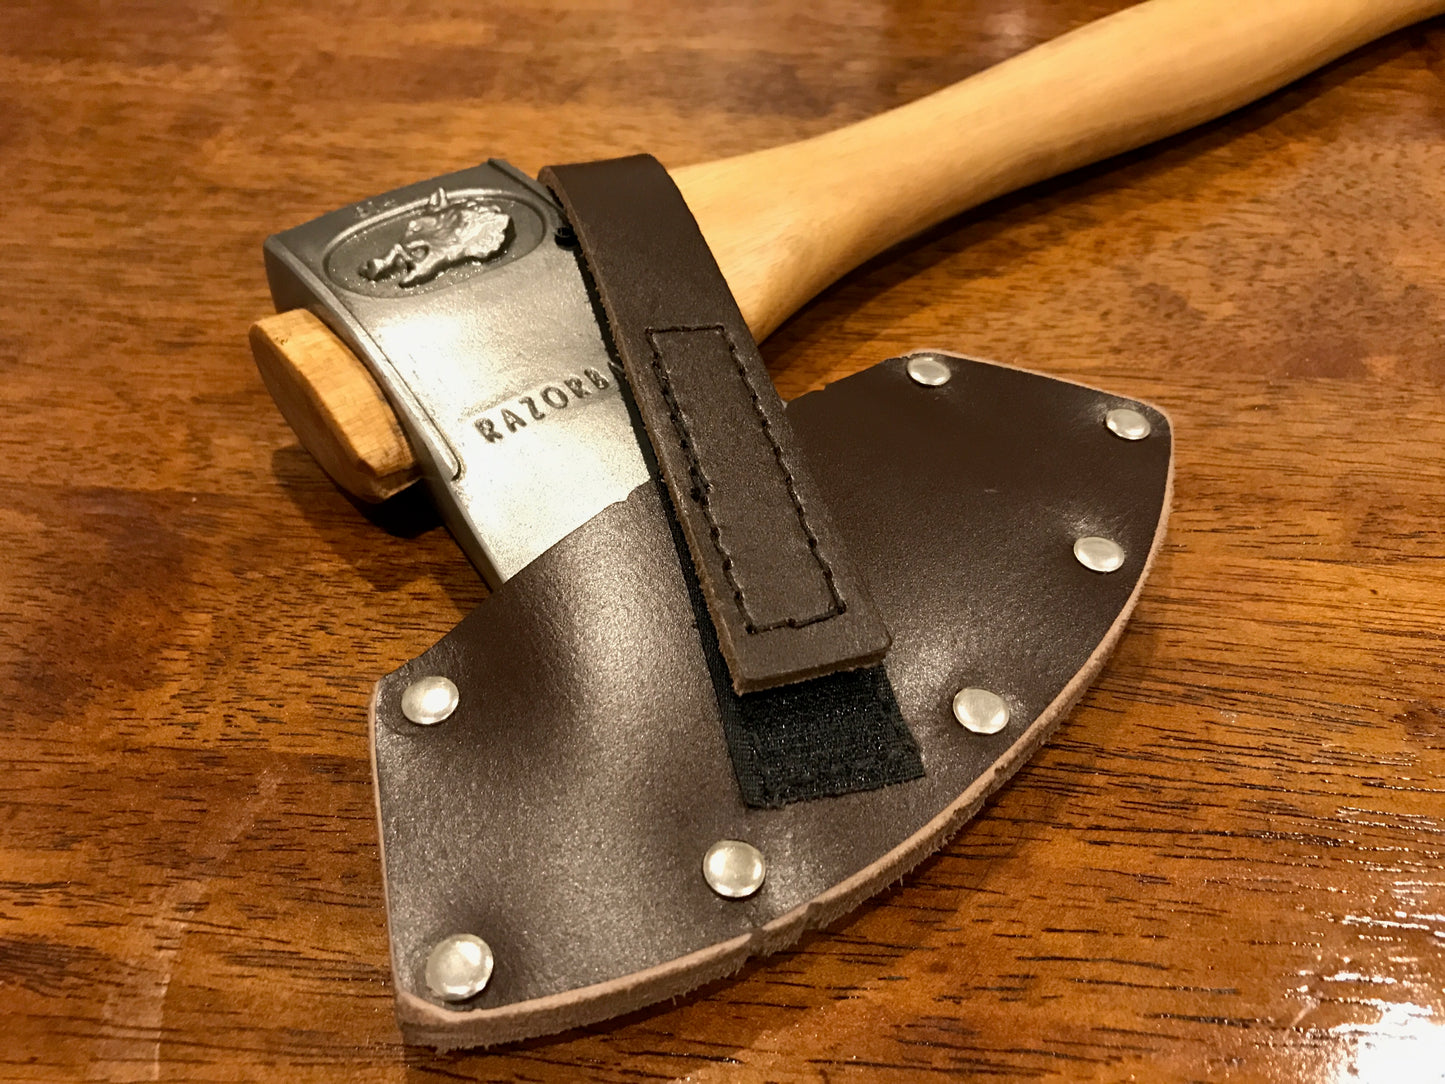 Razorback Handcrafted Hatchet including cover  IN PRODUCTION - PREORDERS ACCEPTED